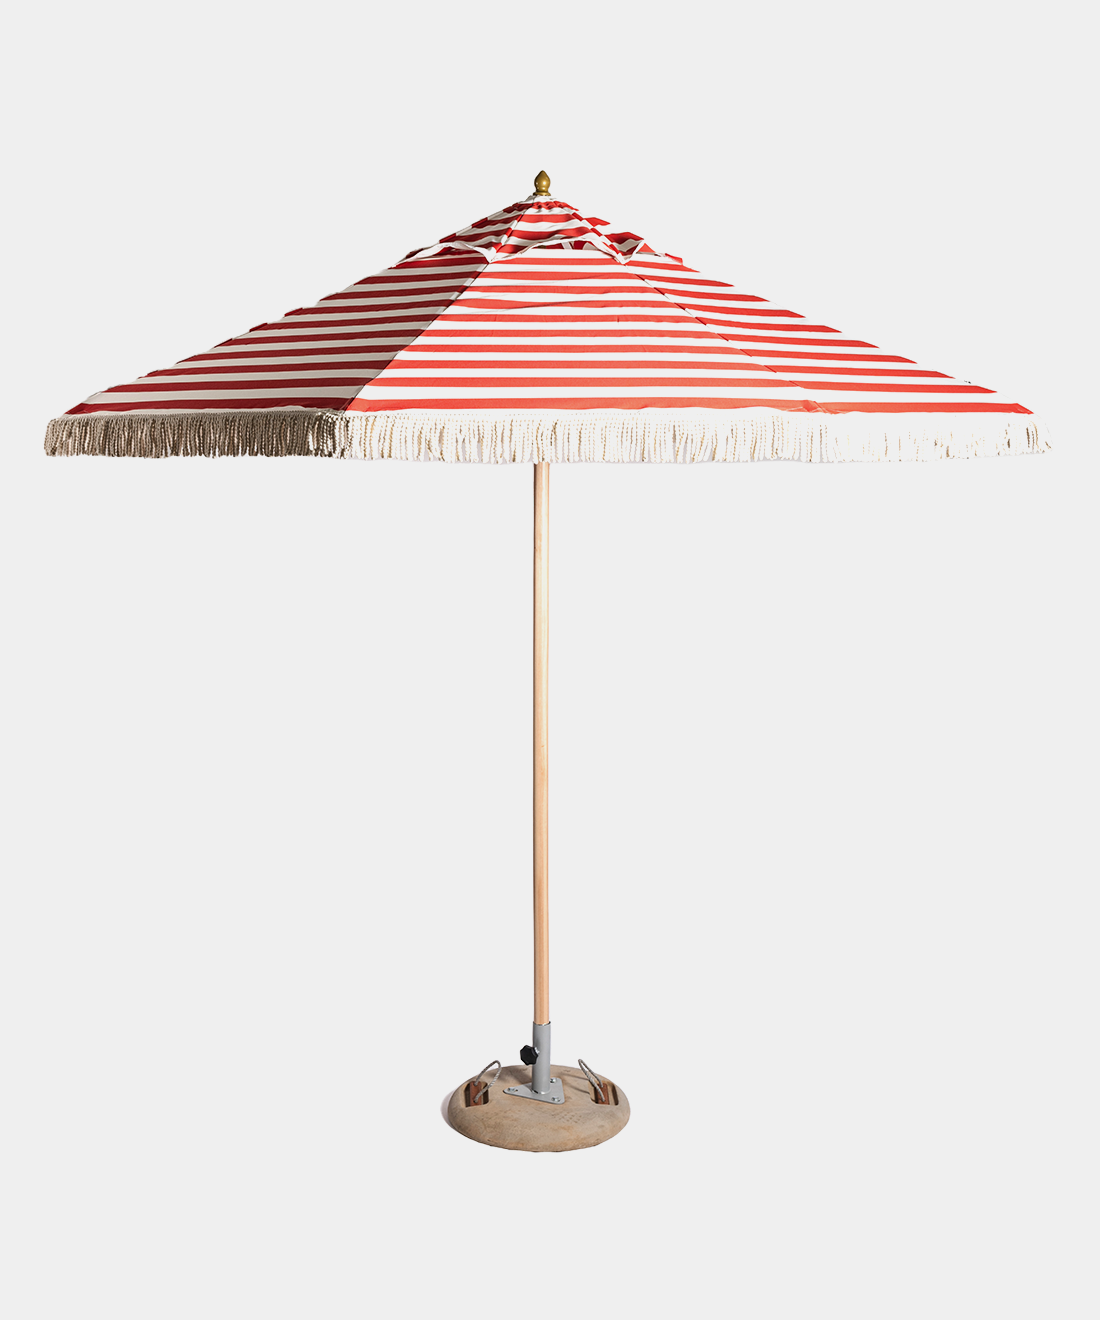 Parasol with Tassels in Red Stripe, 300cm